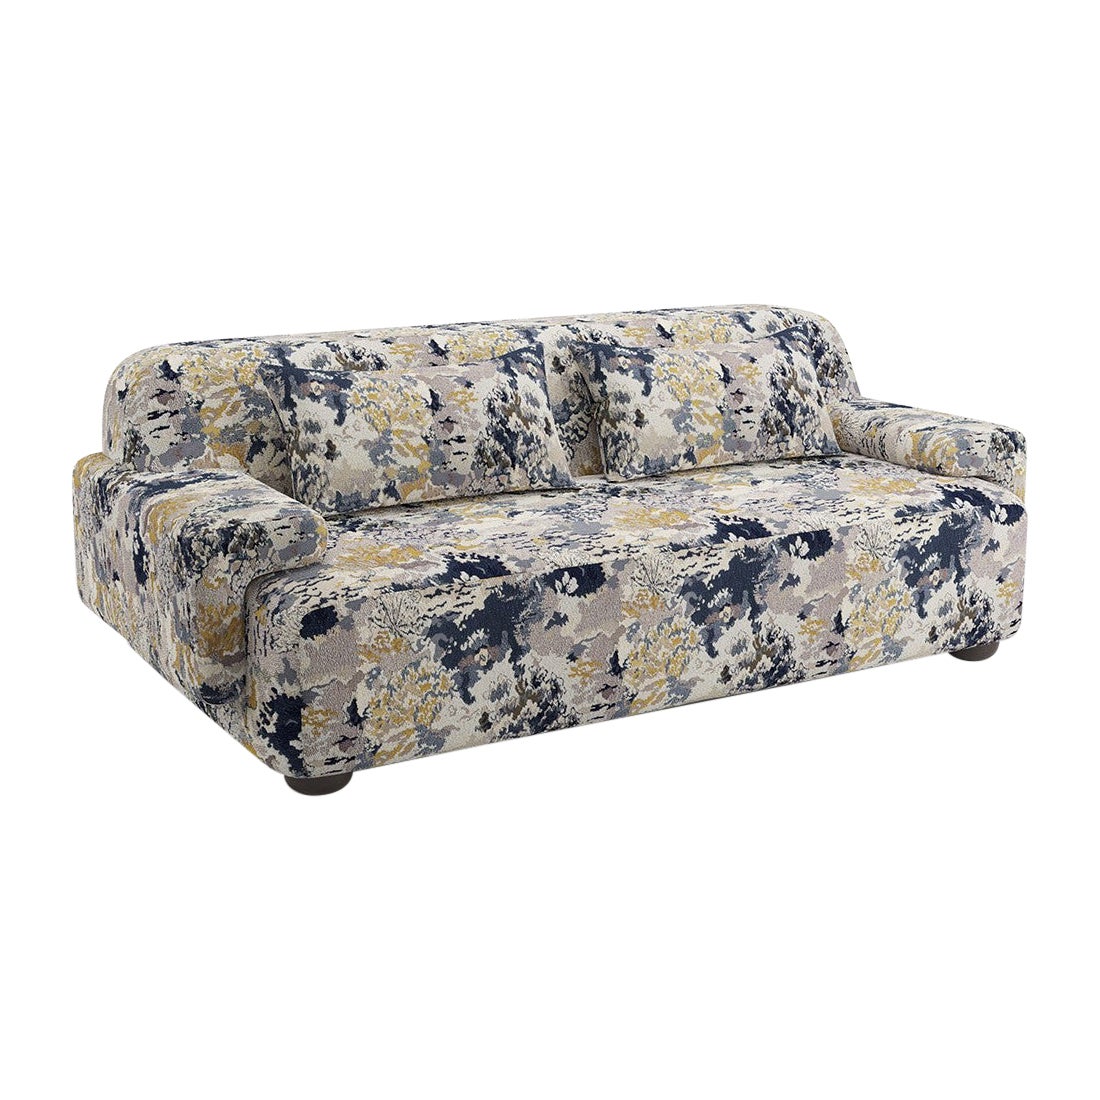 Popus Editions Lena 3-Seater Sofa in Indigo Marrakech Jacquard Upholstery For Sale